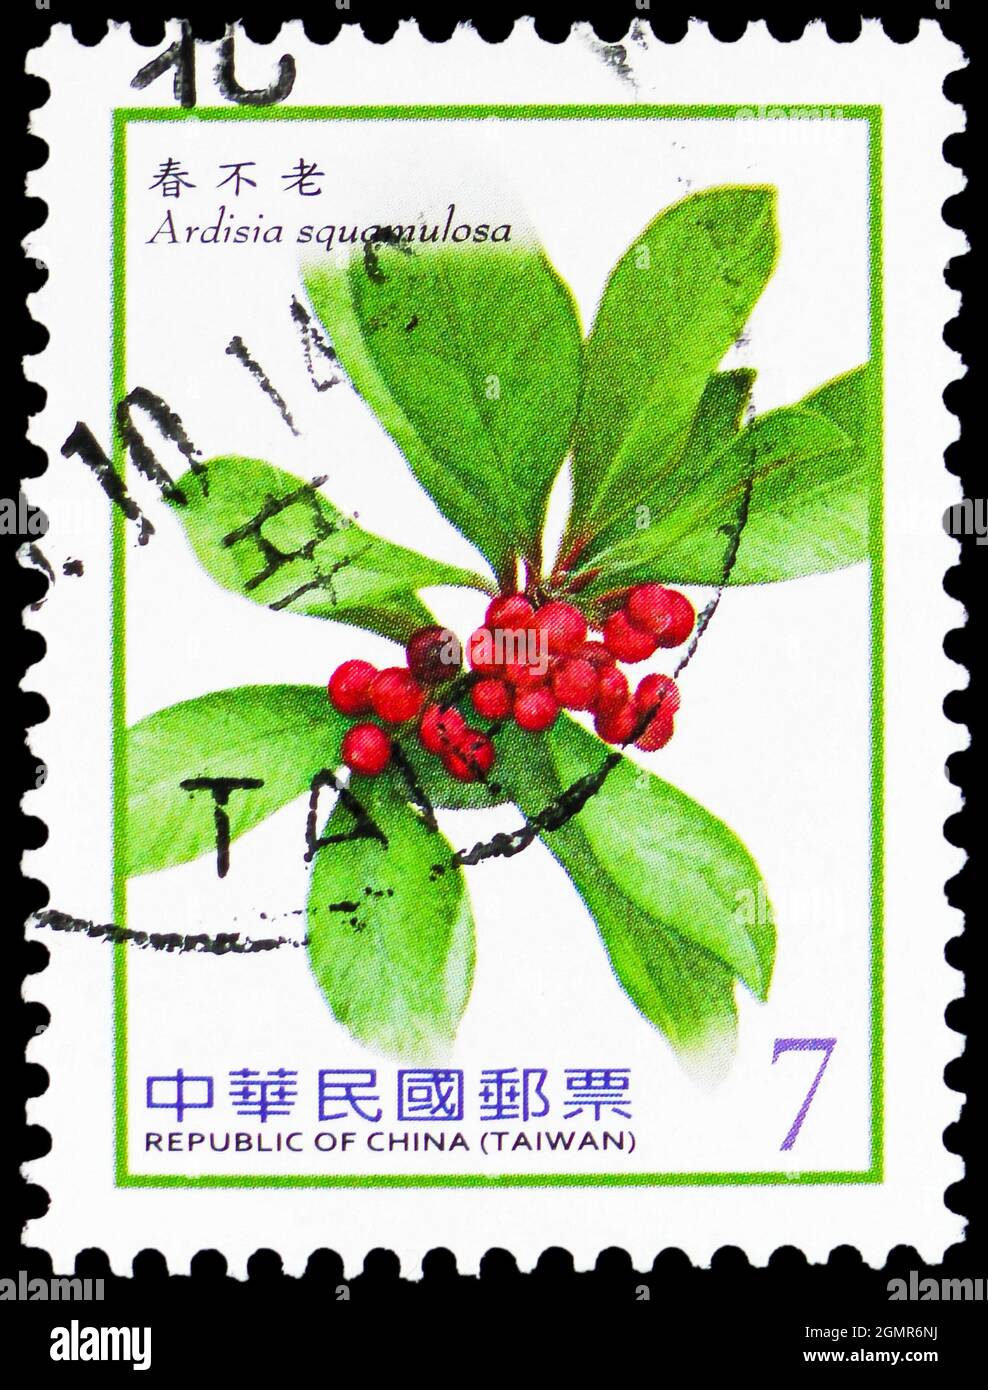 MOSCOW, RUSSIA - JULY 31, 2021: Postage stamp printed in Taiwan shows Ardisia squamulosa, Berries (2012-2014) serie, circa 2012 Stock Photo